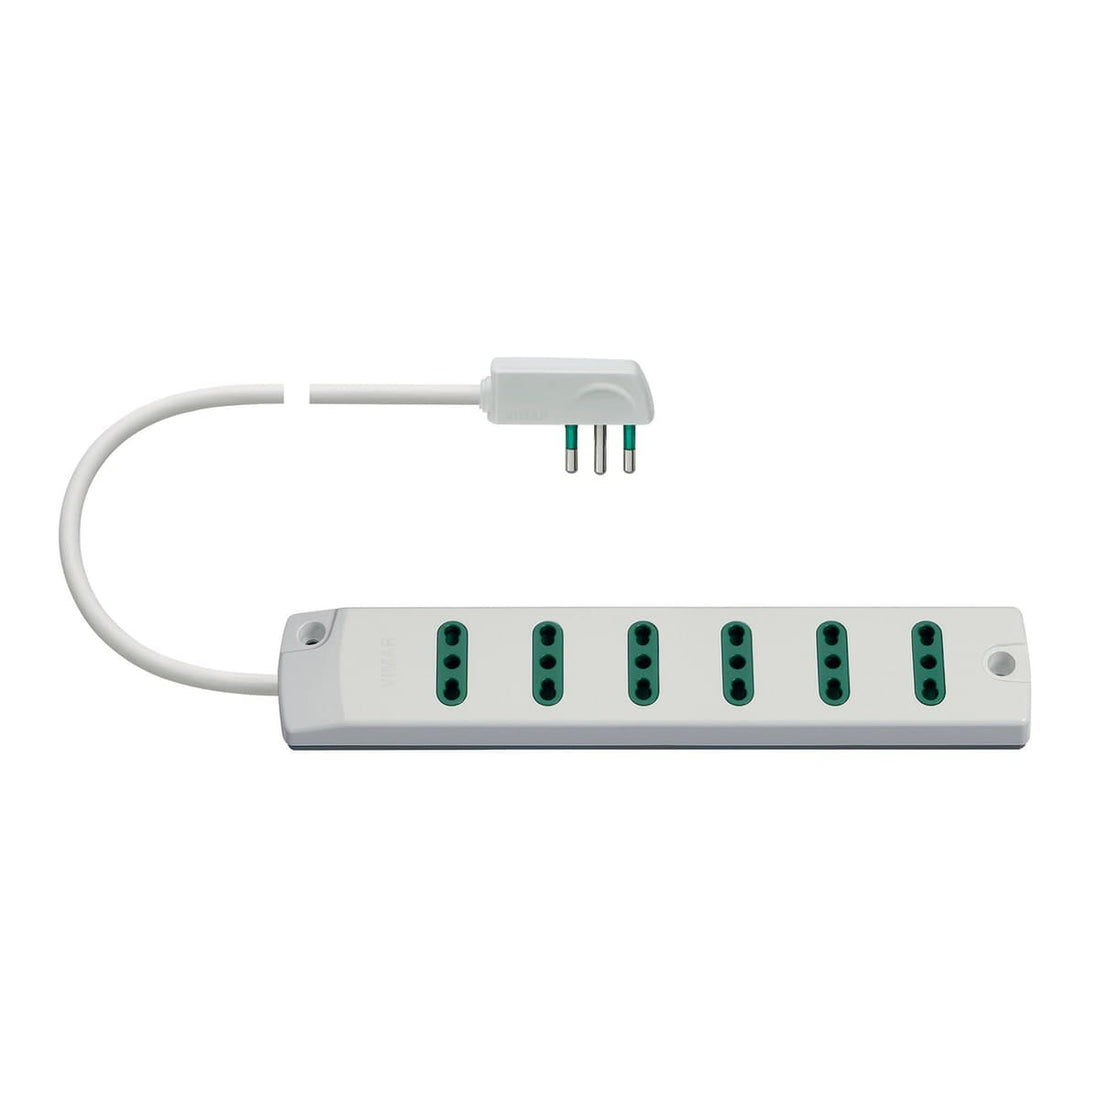 MULTISOCKET PLUG 16A 6 PLACES 10/16A CABLE 1.5 M WHITE - best price from Maltashopper.com BR420110397